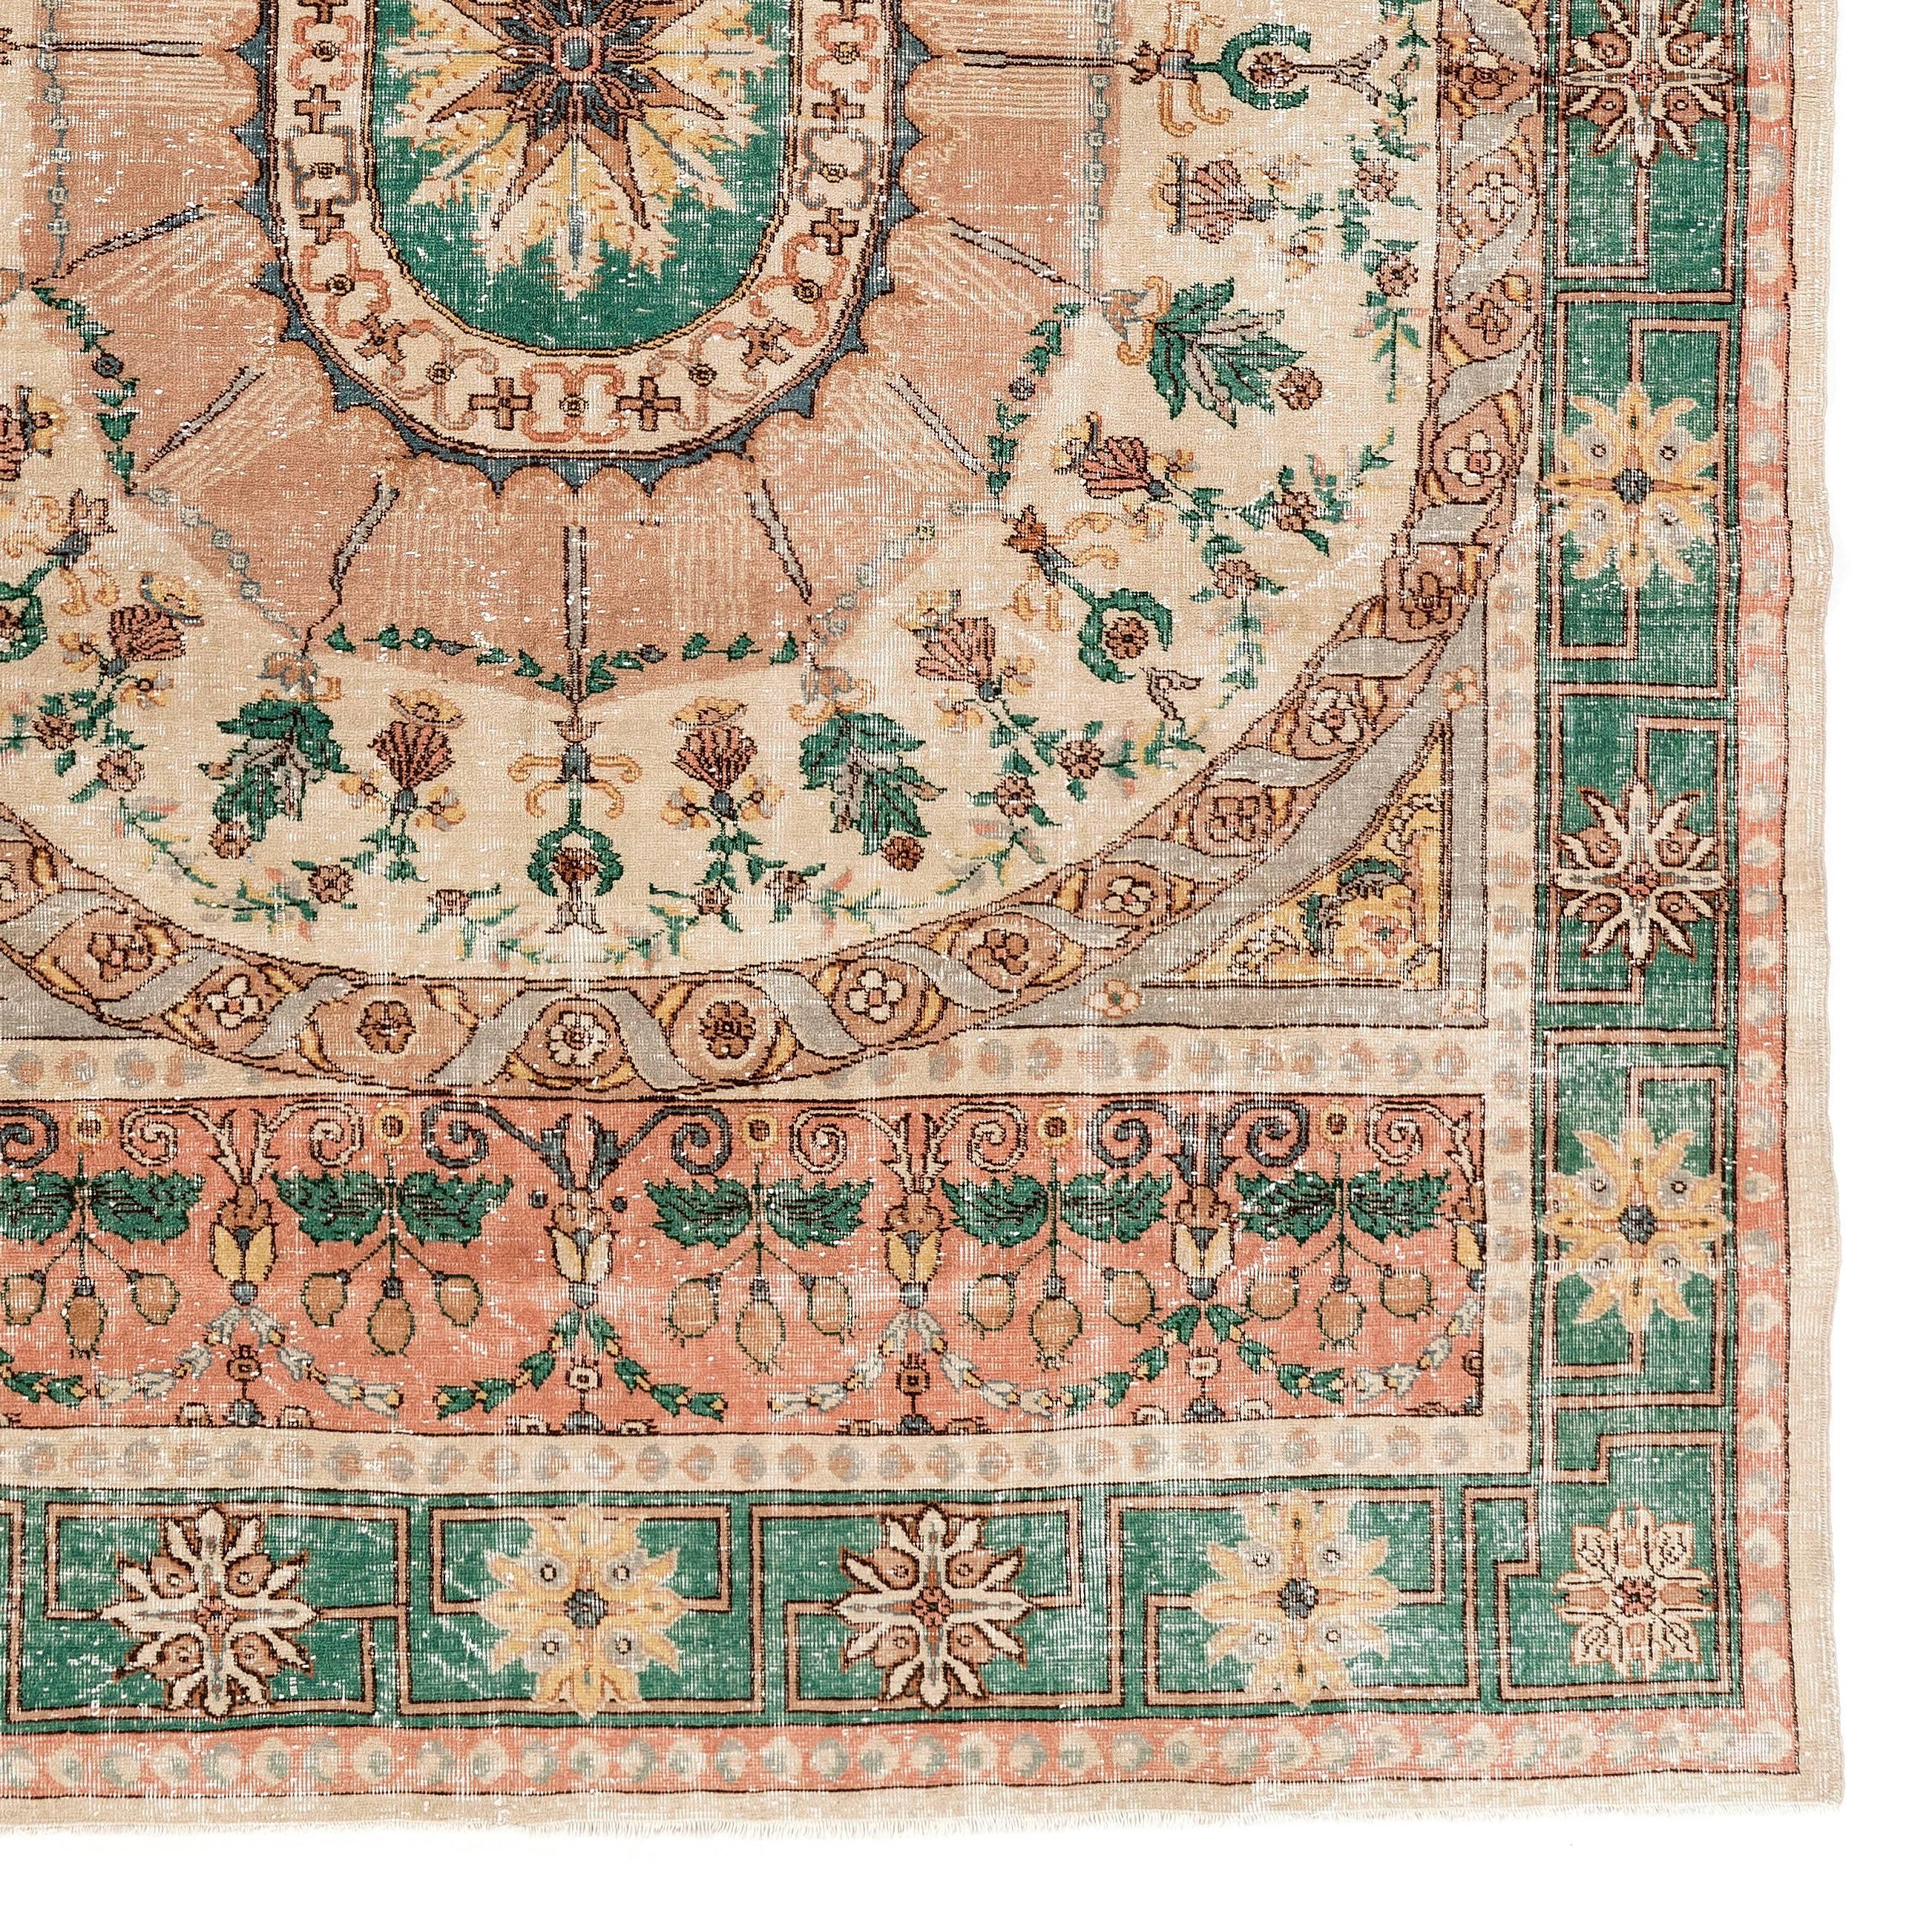 Aubusson 8.4x12 Ft Unusual Vintage Hand Knotted European Rug. French Design Wool Carpet For Sale